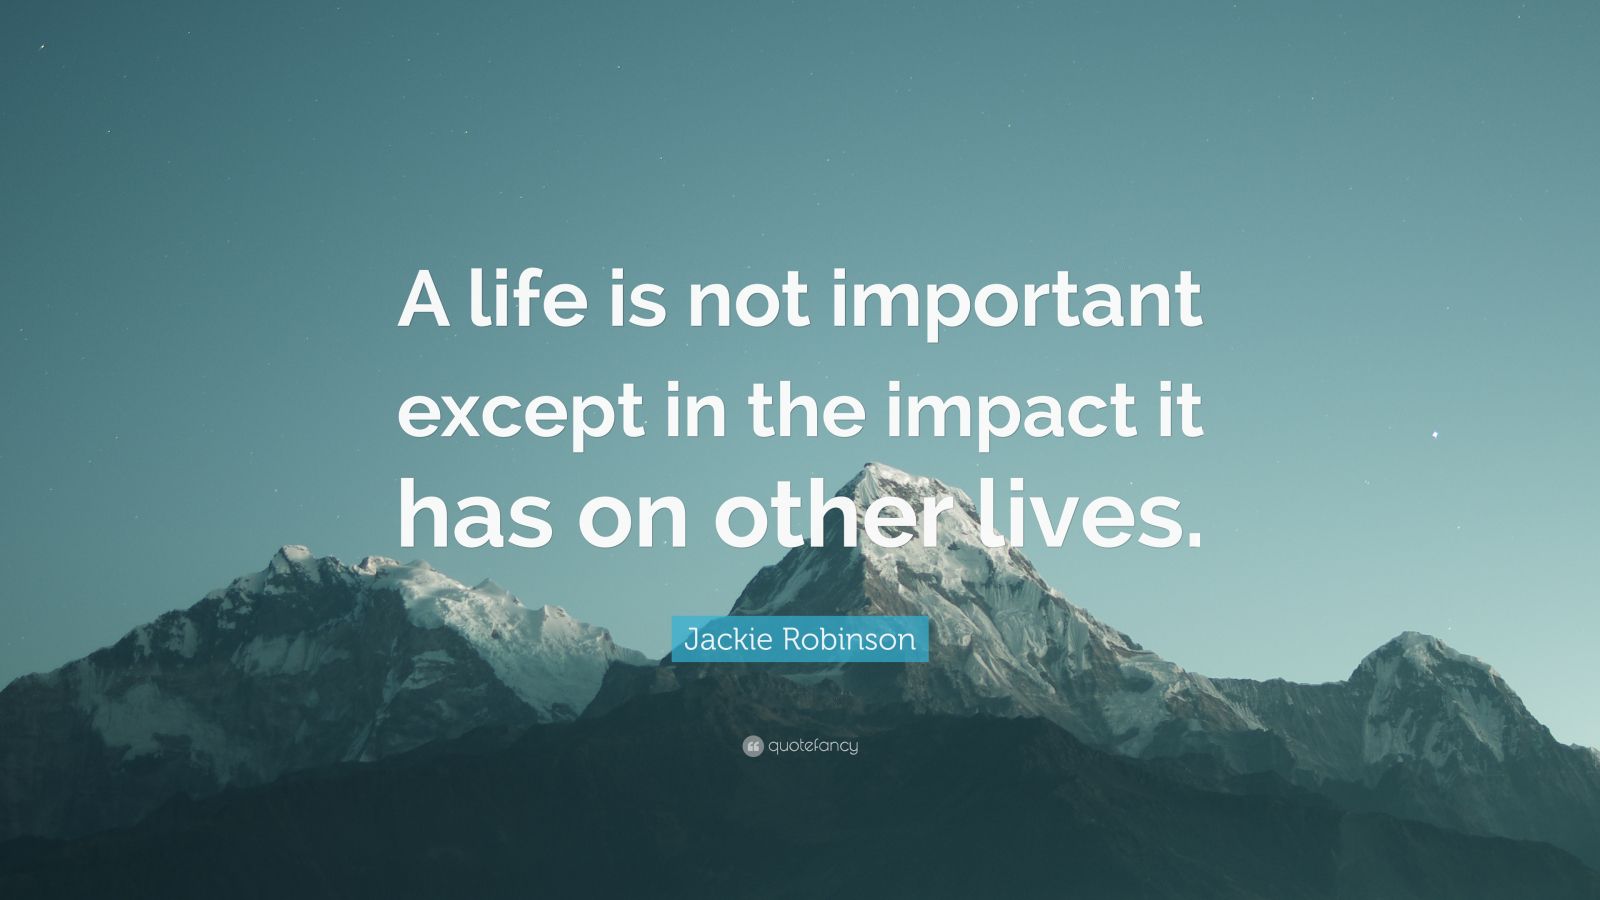 Jackie Robinson Quote: “A life is not important except in the impact it